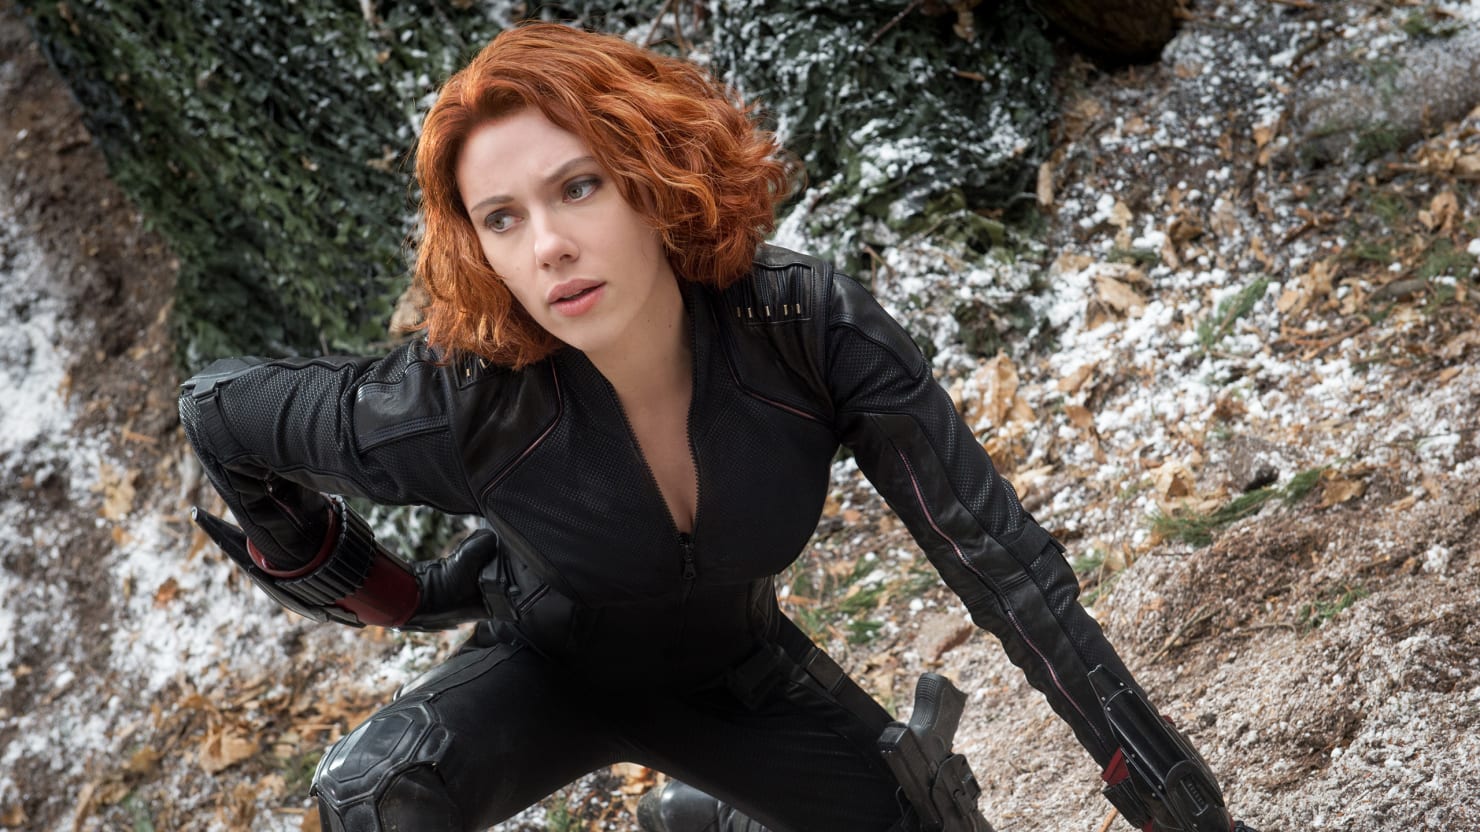 Image result for black widow age of ultron